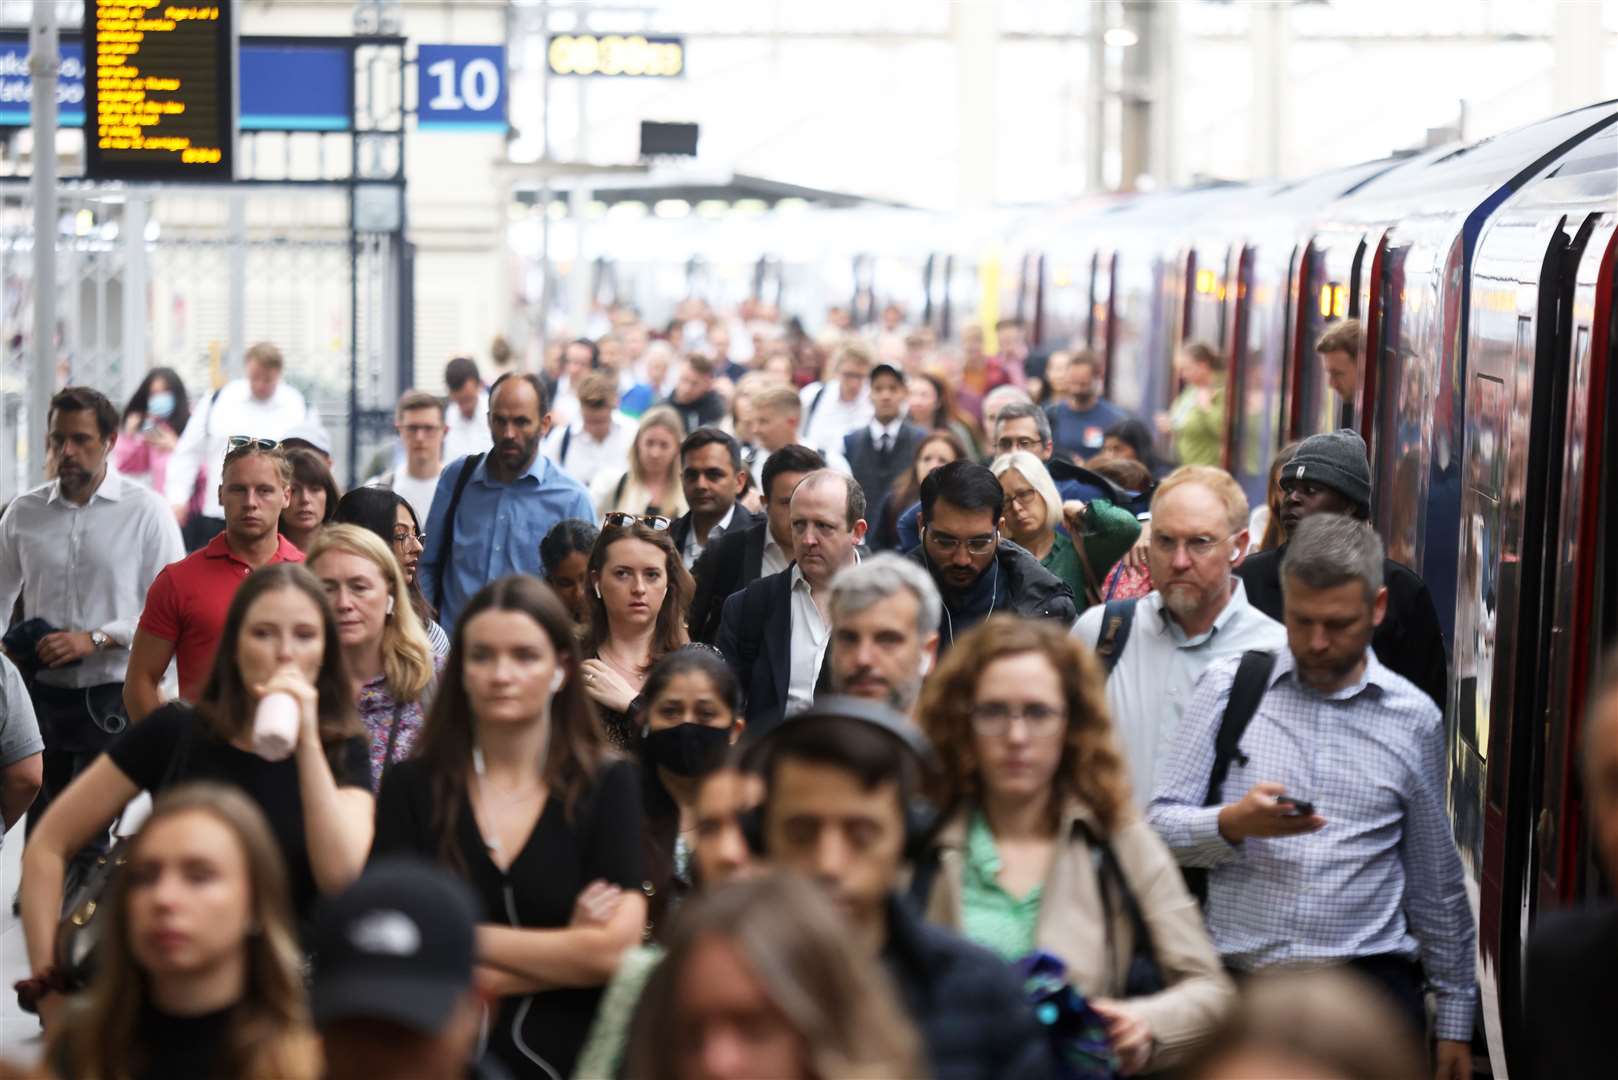 Passengers during a busier period at Waterloo station (James Manning/PA)